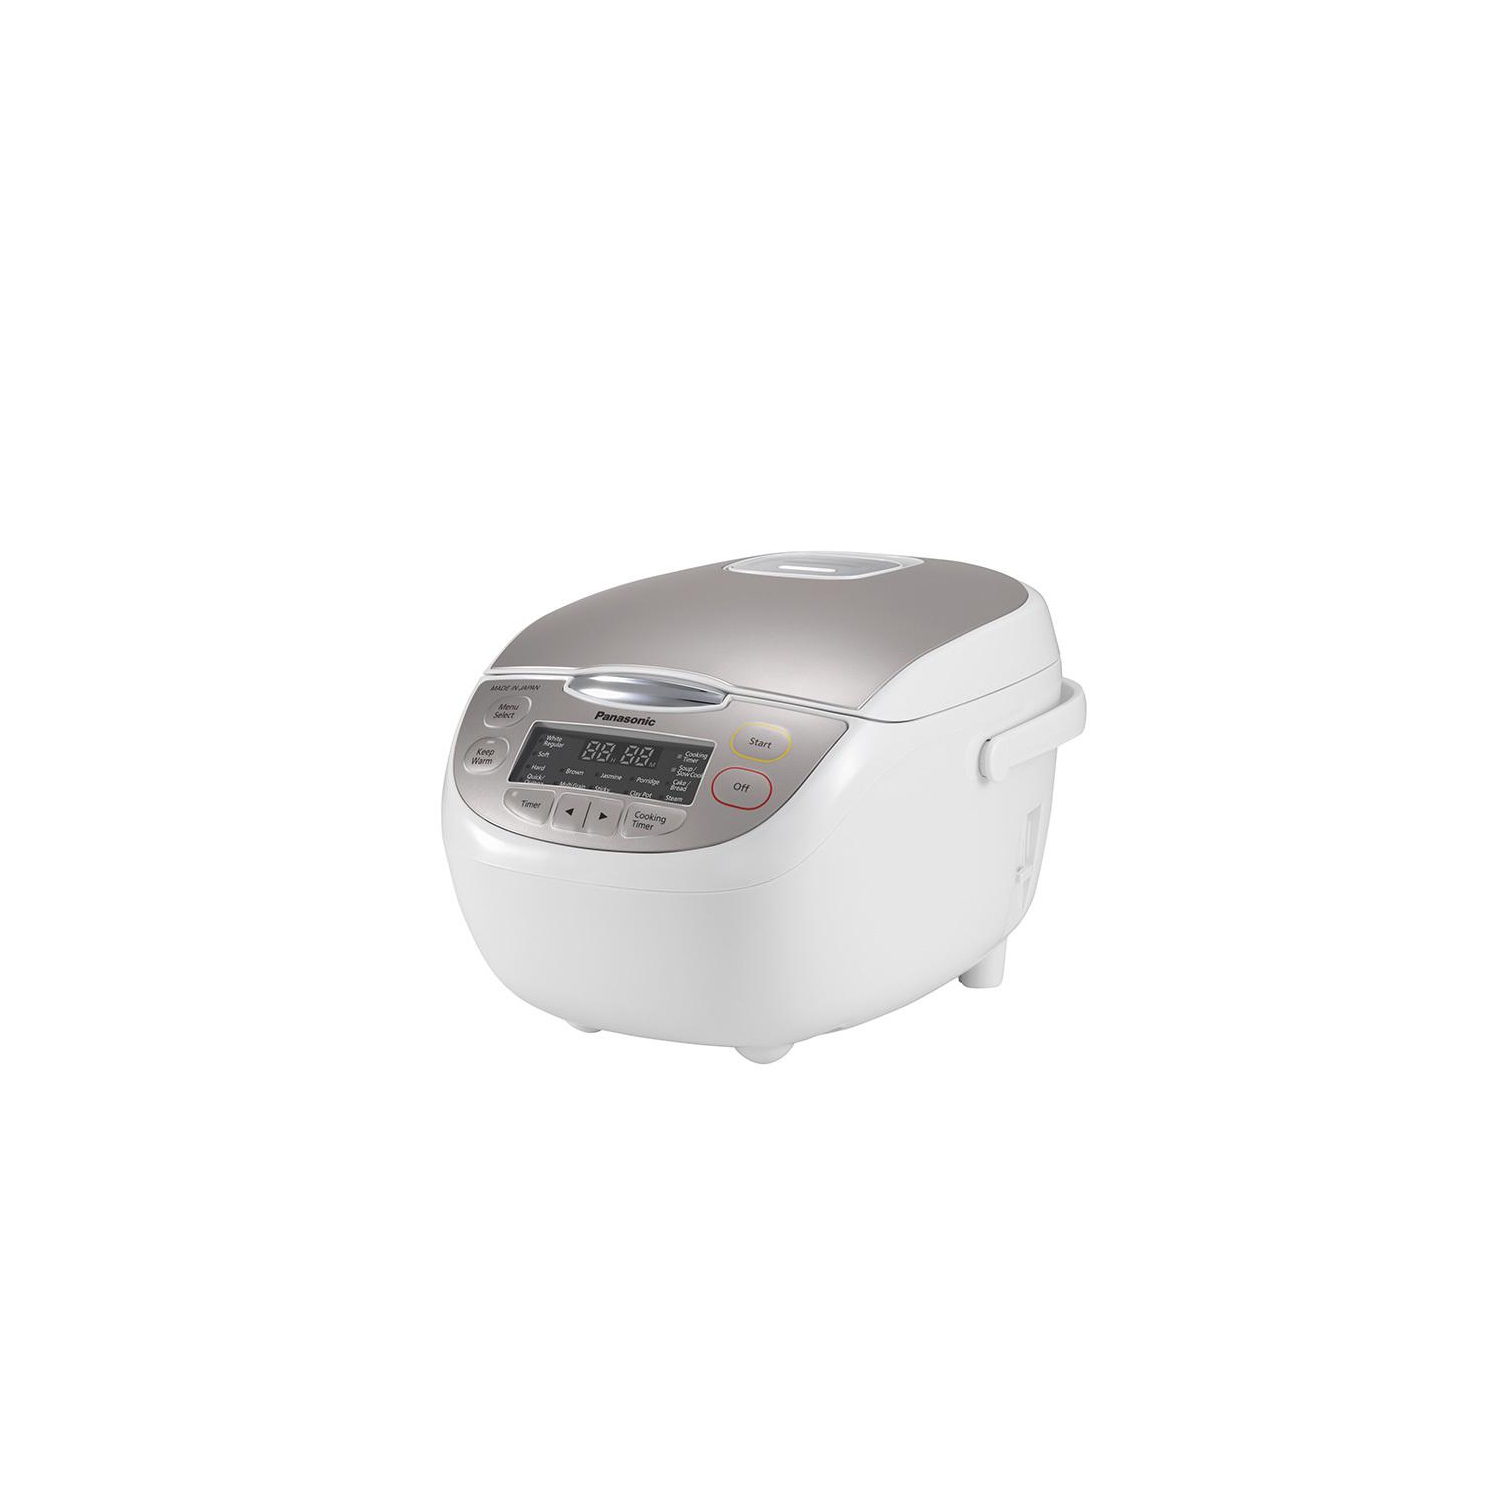 Panasonic Rice Cooker | SRJMY108 | 5-cup, Microcomputer Controlled (Made in Japan)